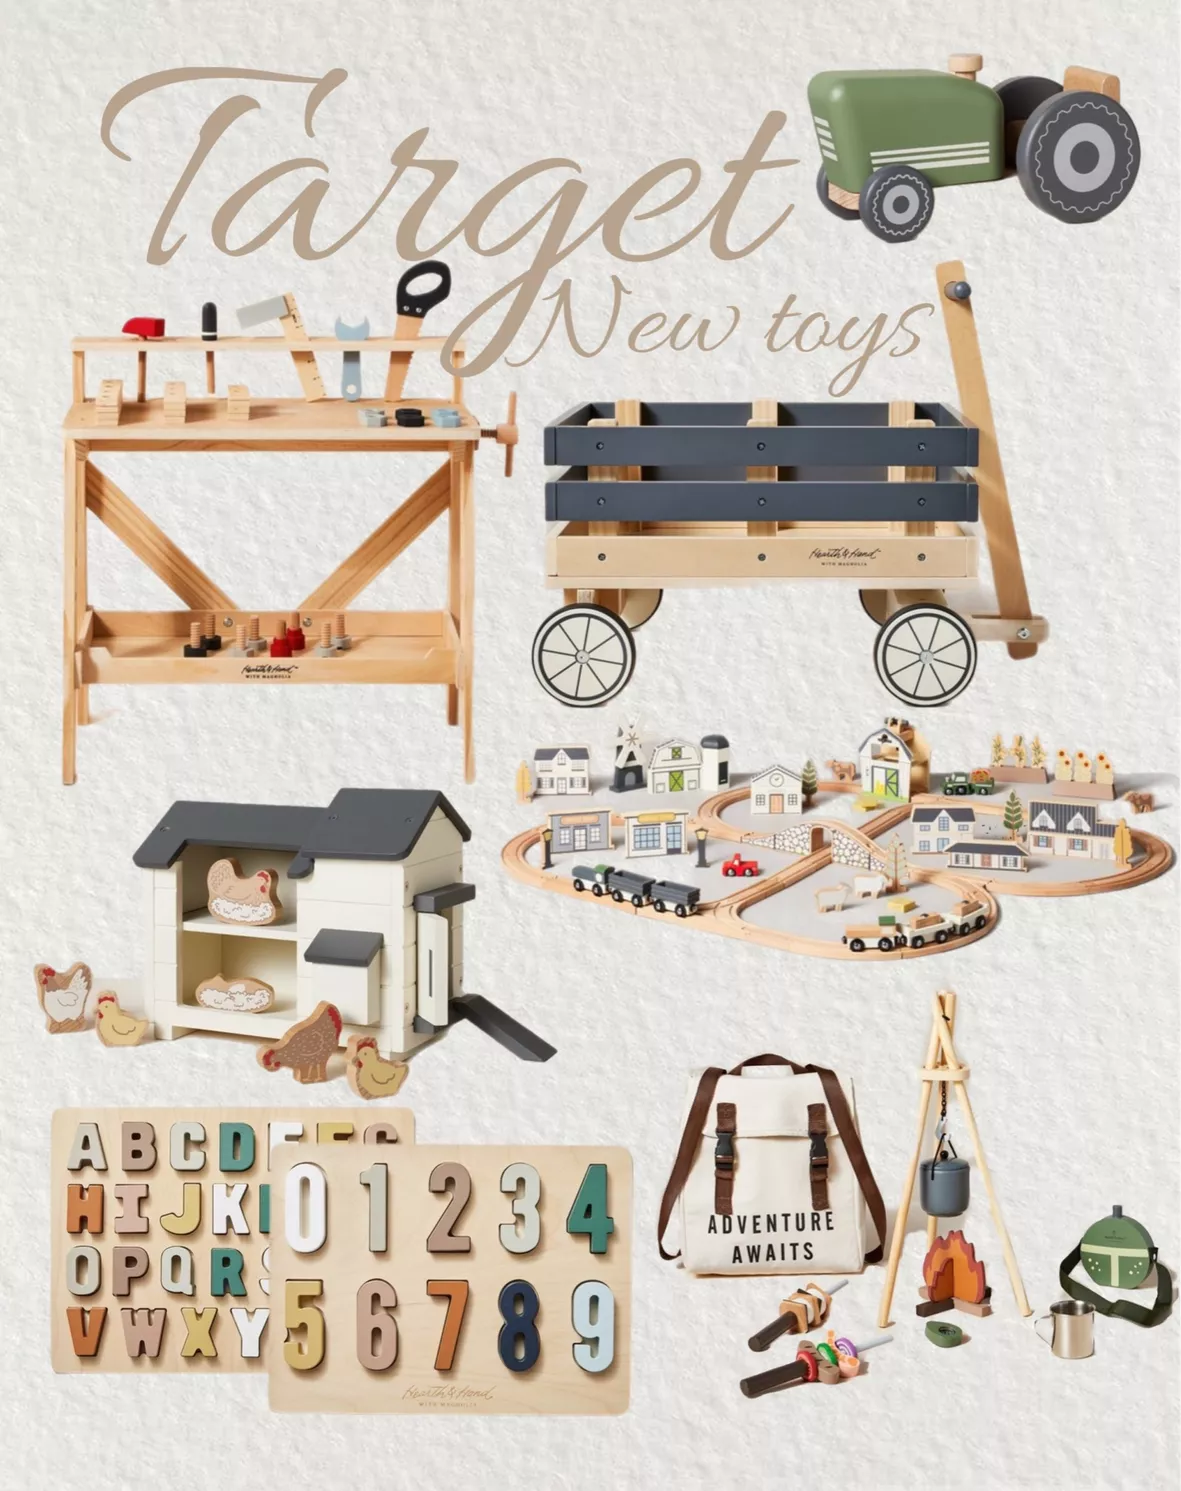 Toy Numbers Peg Puzzle - 11pc - Hearth & Hand™ With Magnolia : Target